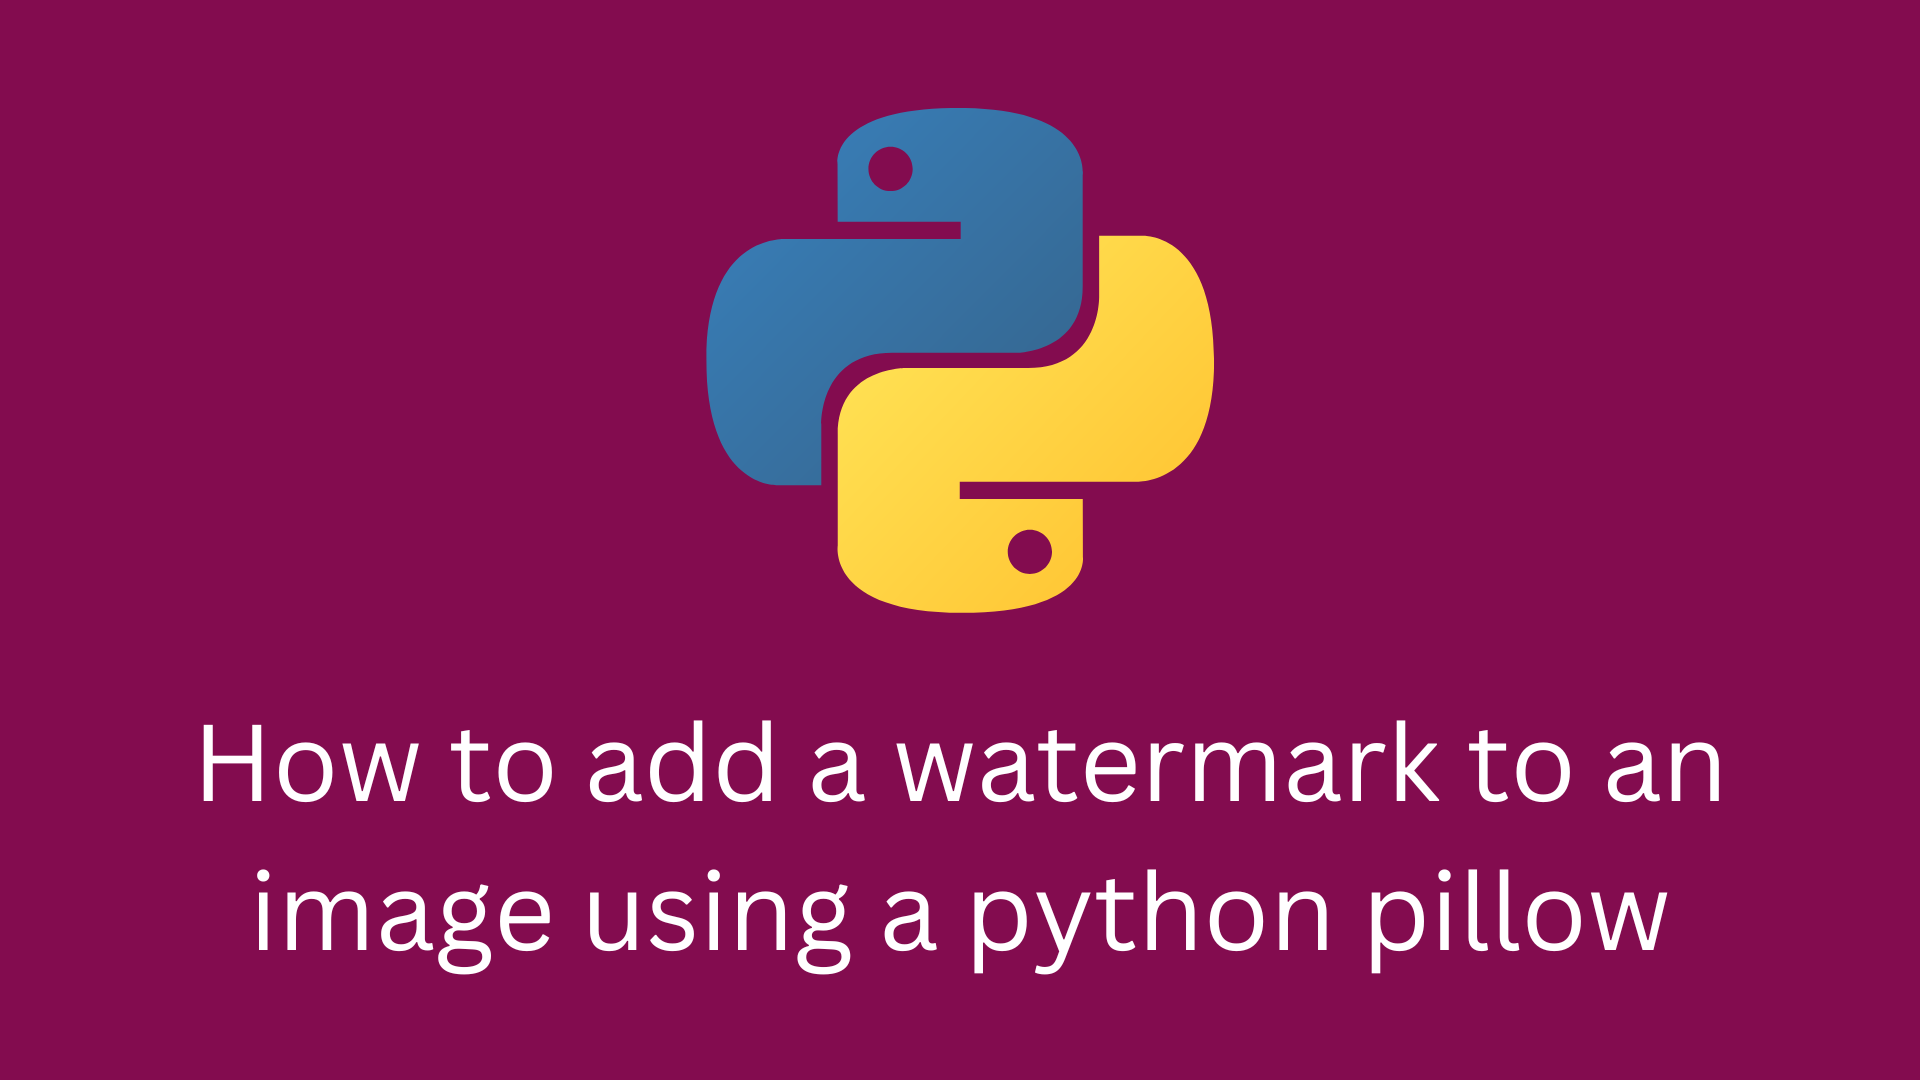 How to add a watermark to an image using a python pillow